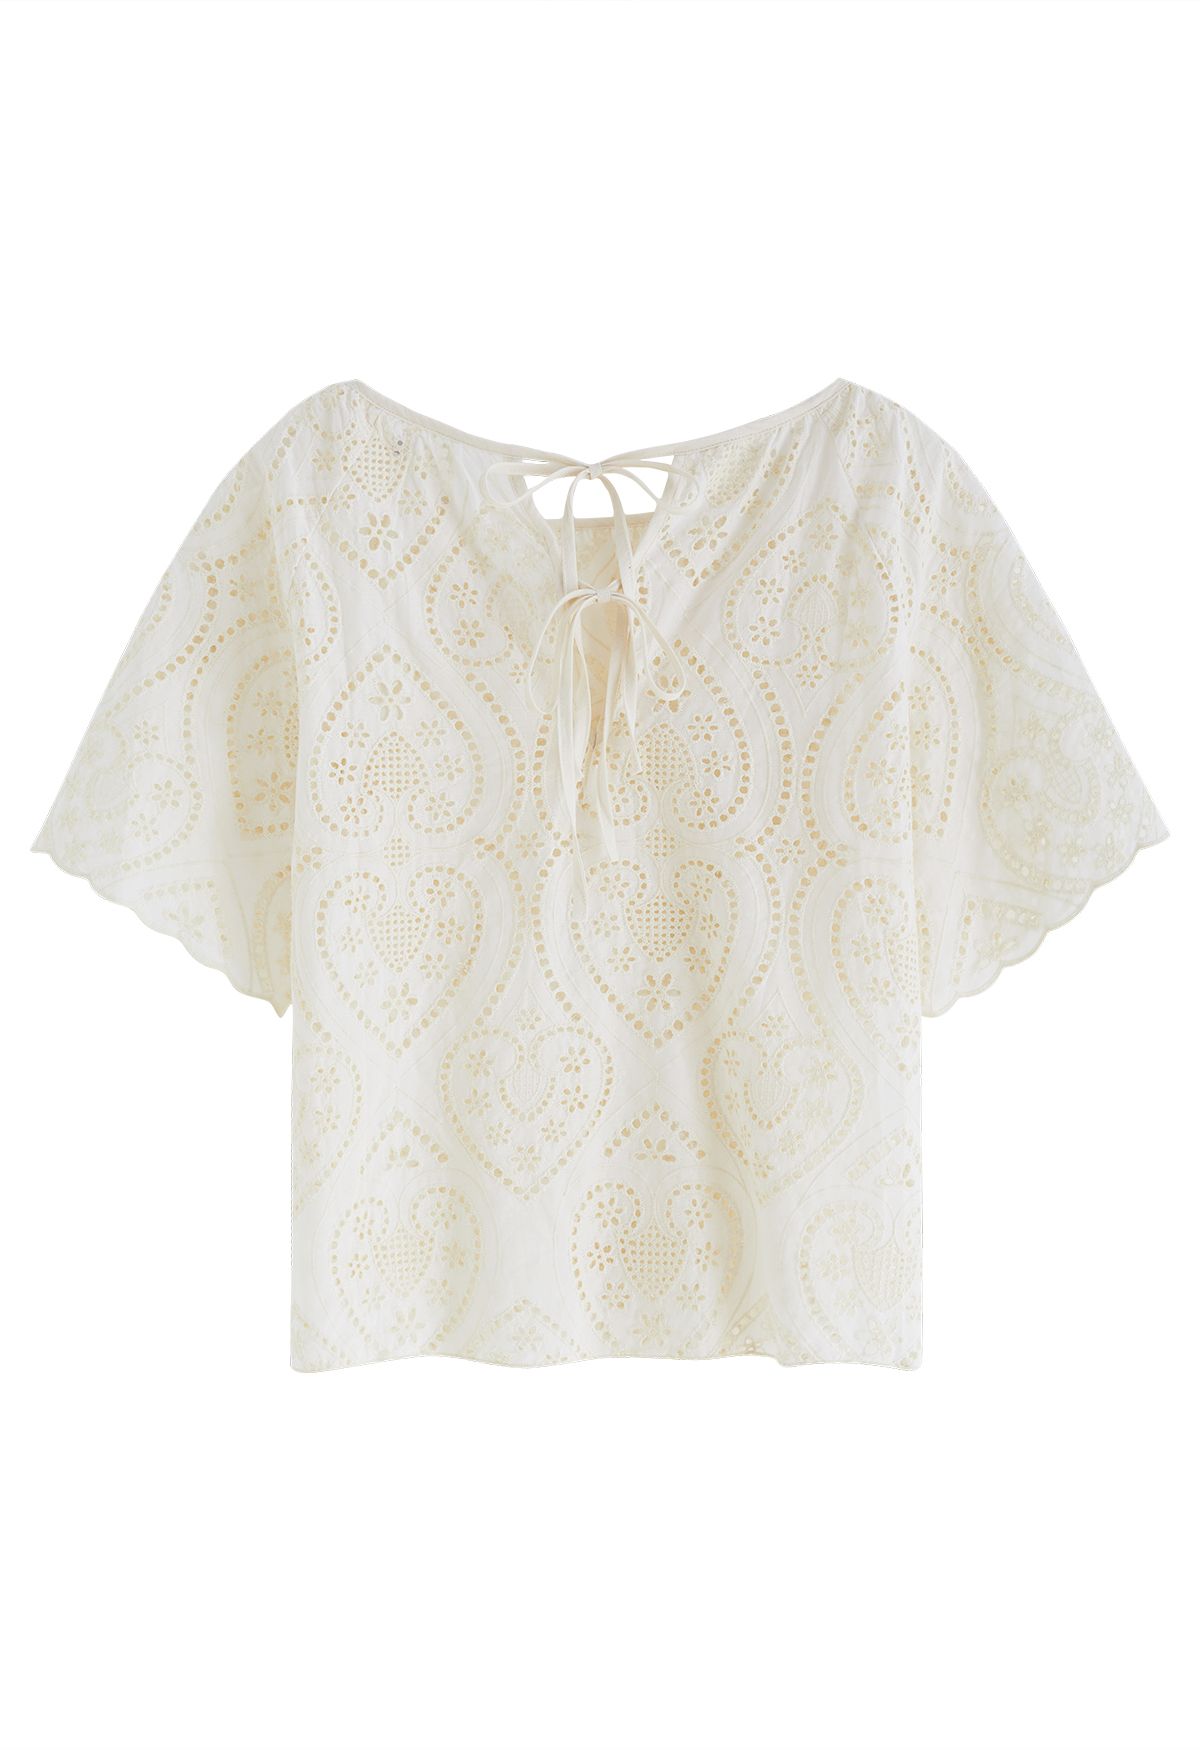 Beloved Heart Embroidered Eyelet Top in Cream